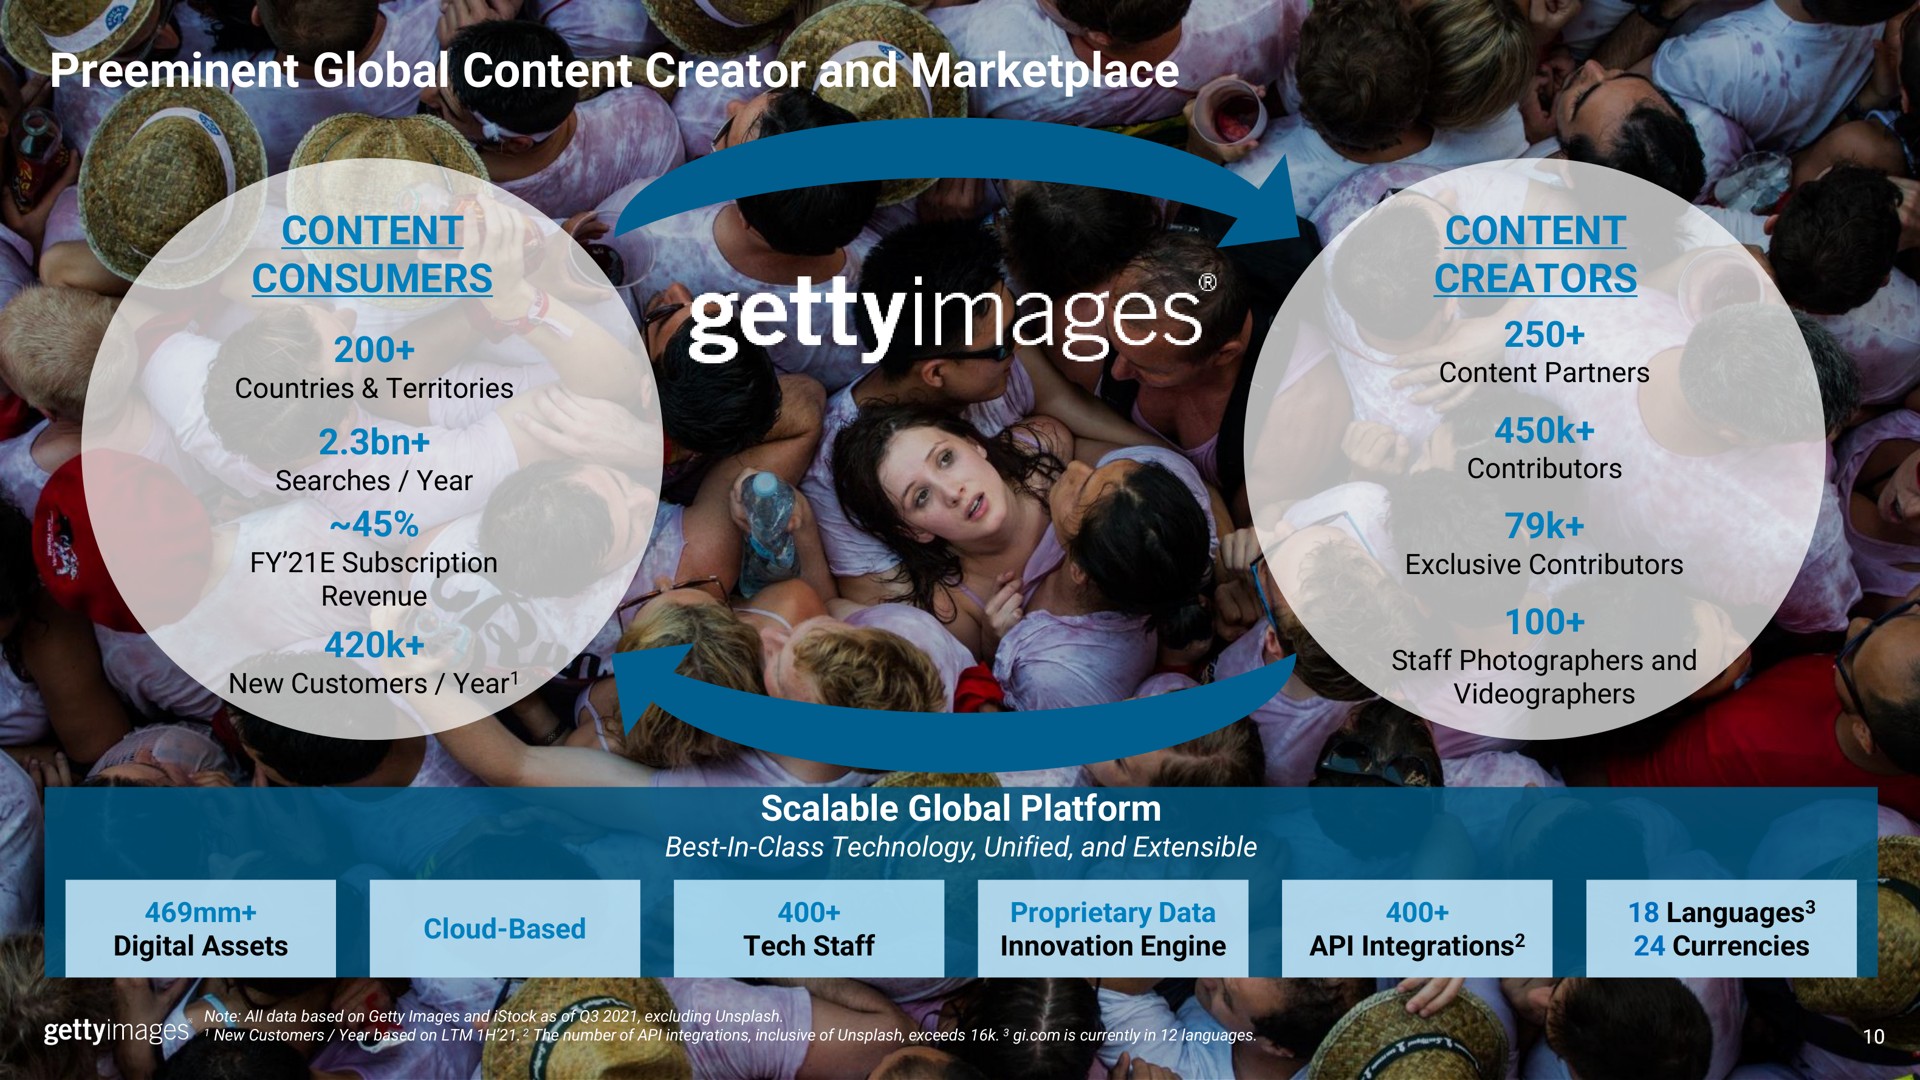 global content creator and content consumers content creators scalable global platform a vee a a as | Getty